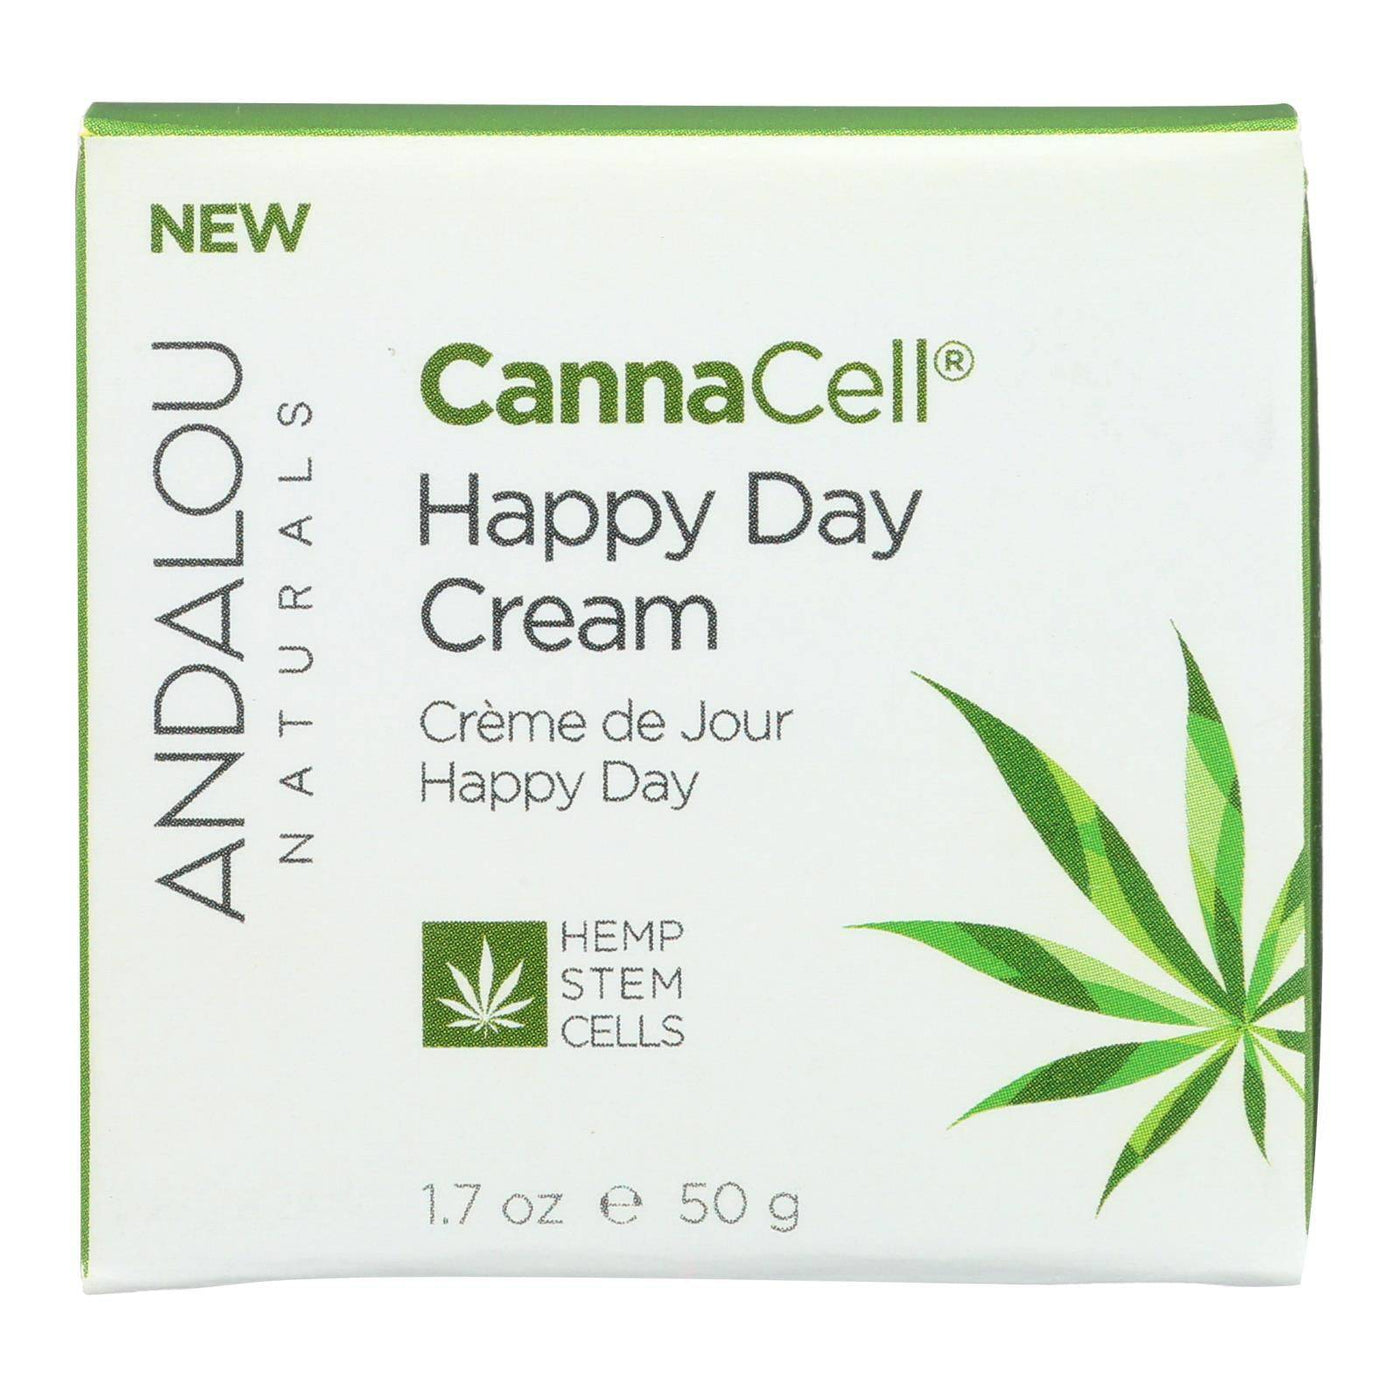 Andalou Naturals - Cannacell Happy Day Cream - 1.7 Oz. | OnlyNaturals.us